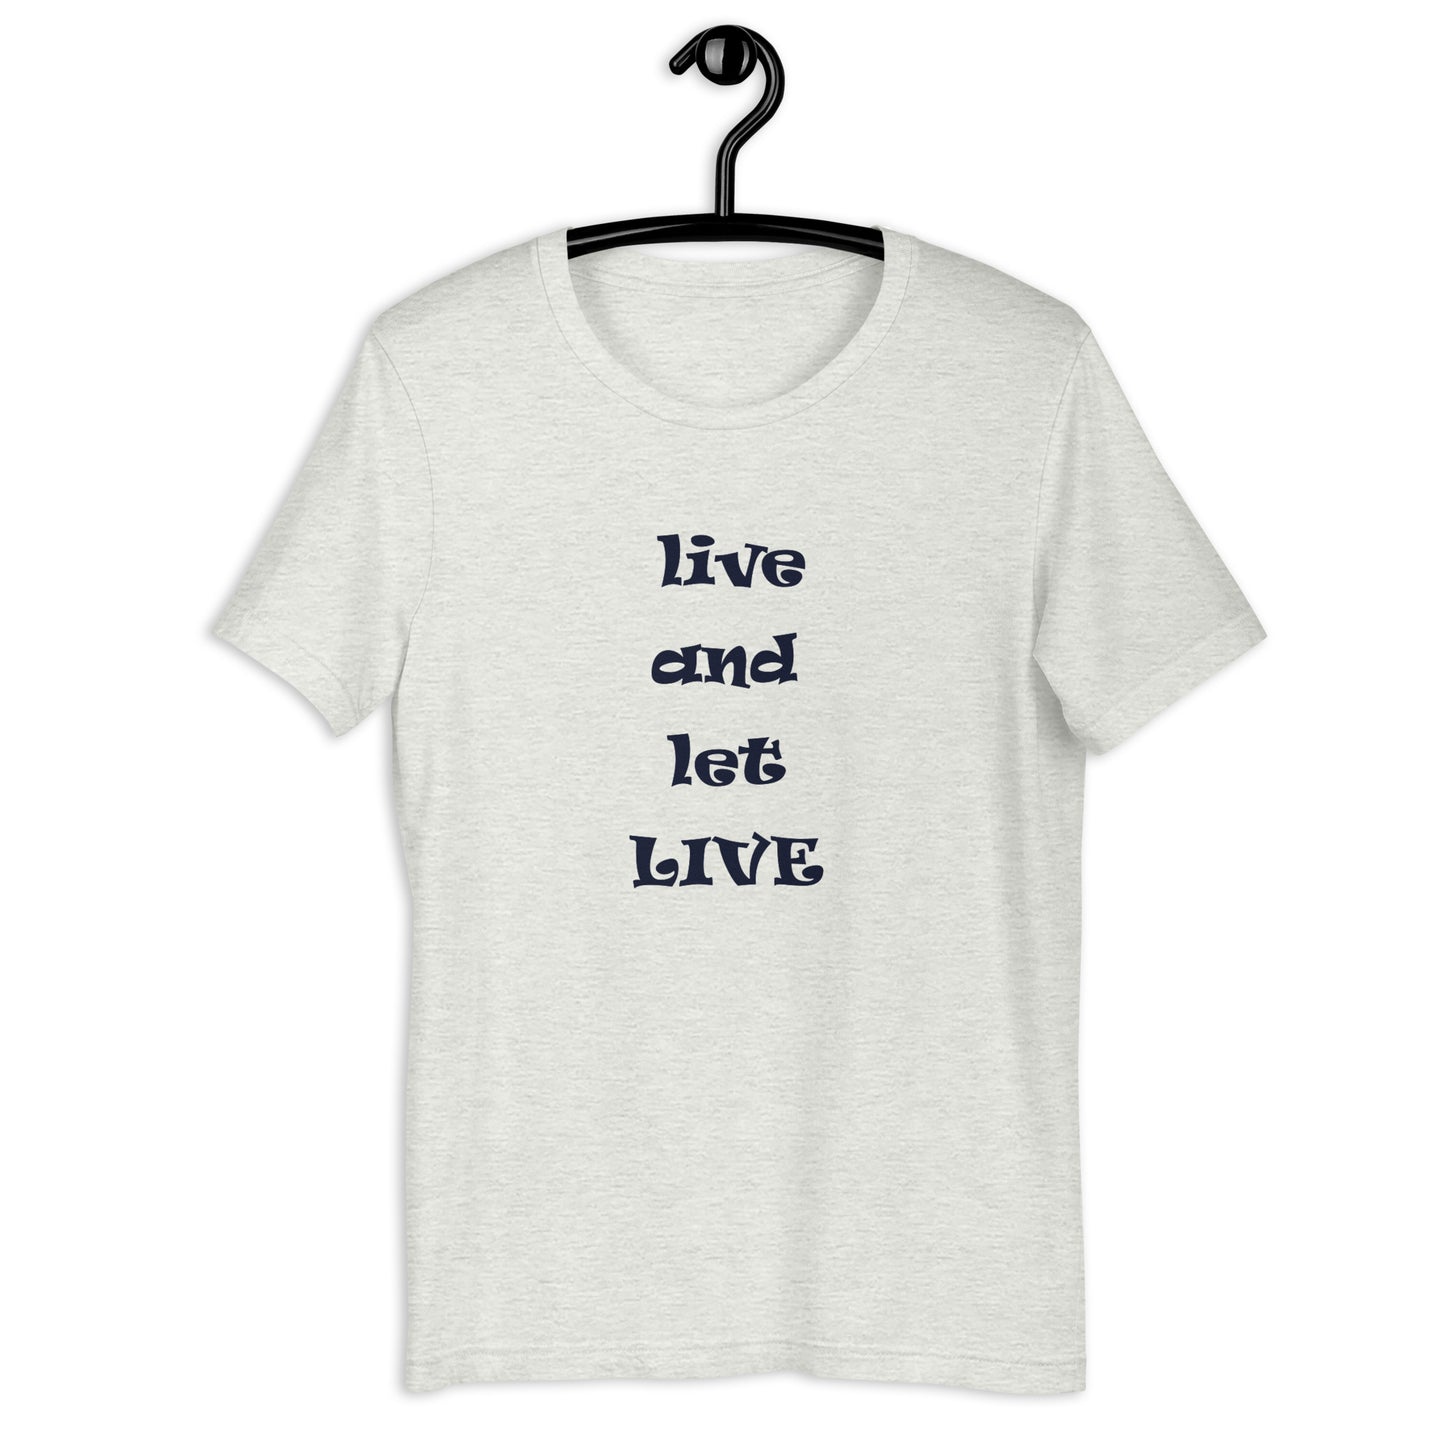 Live and Let Live unisex t-shirt